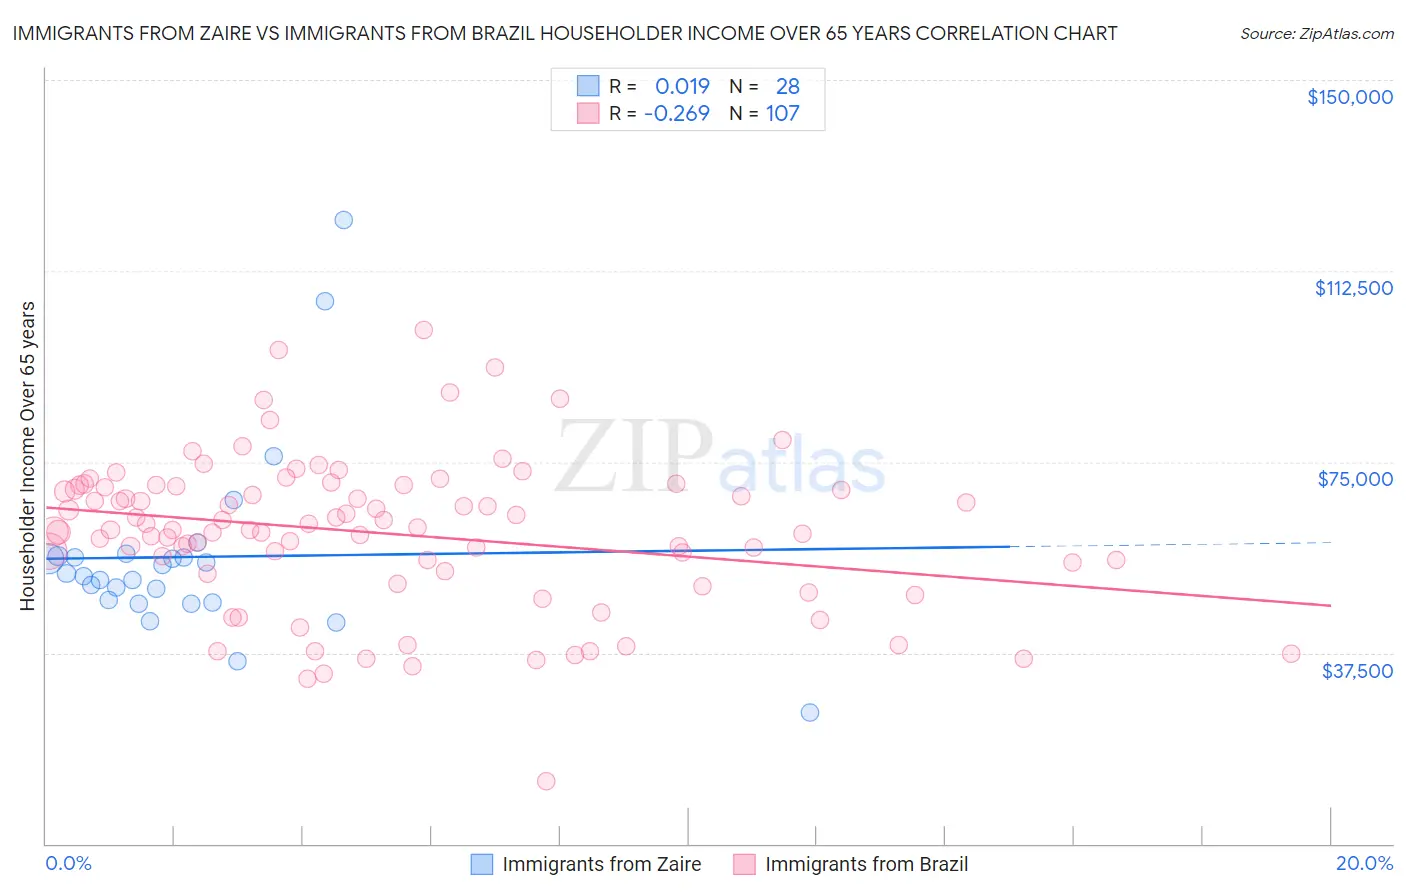 Immigrants from Zaire vs Immigrants from Brazil Householder Income Over 65 years